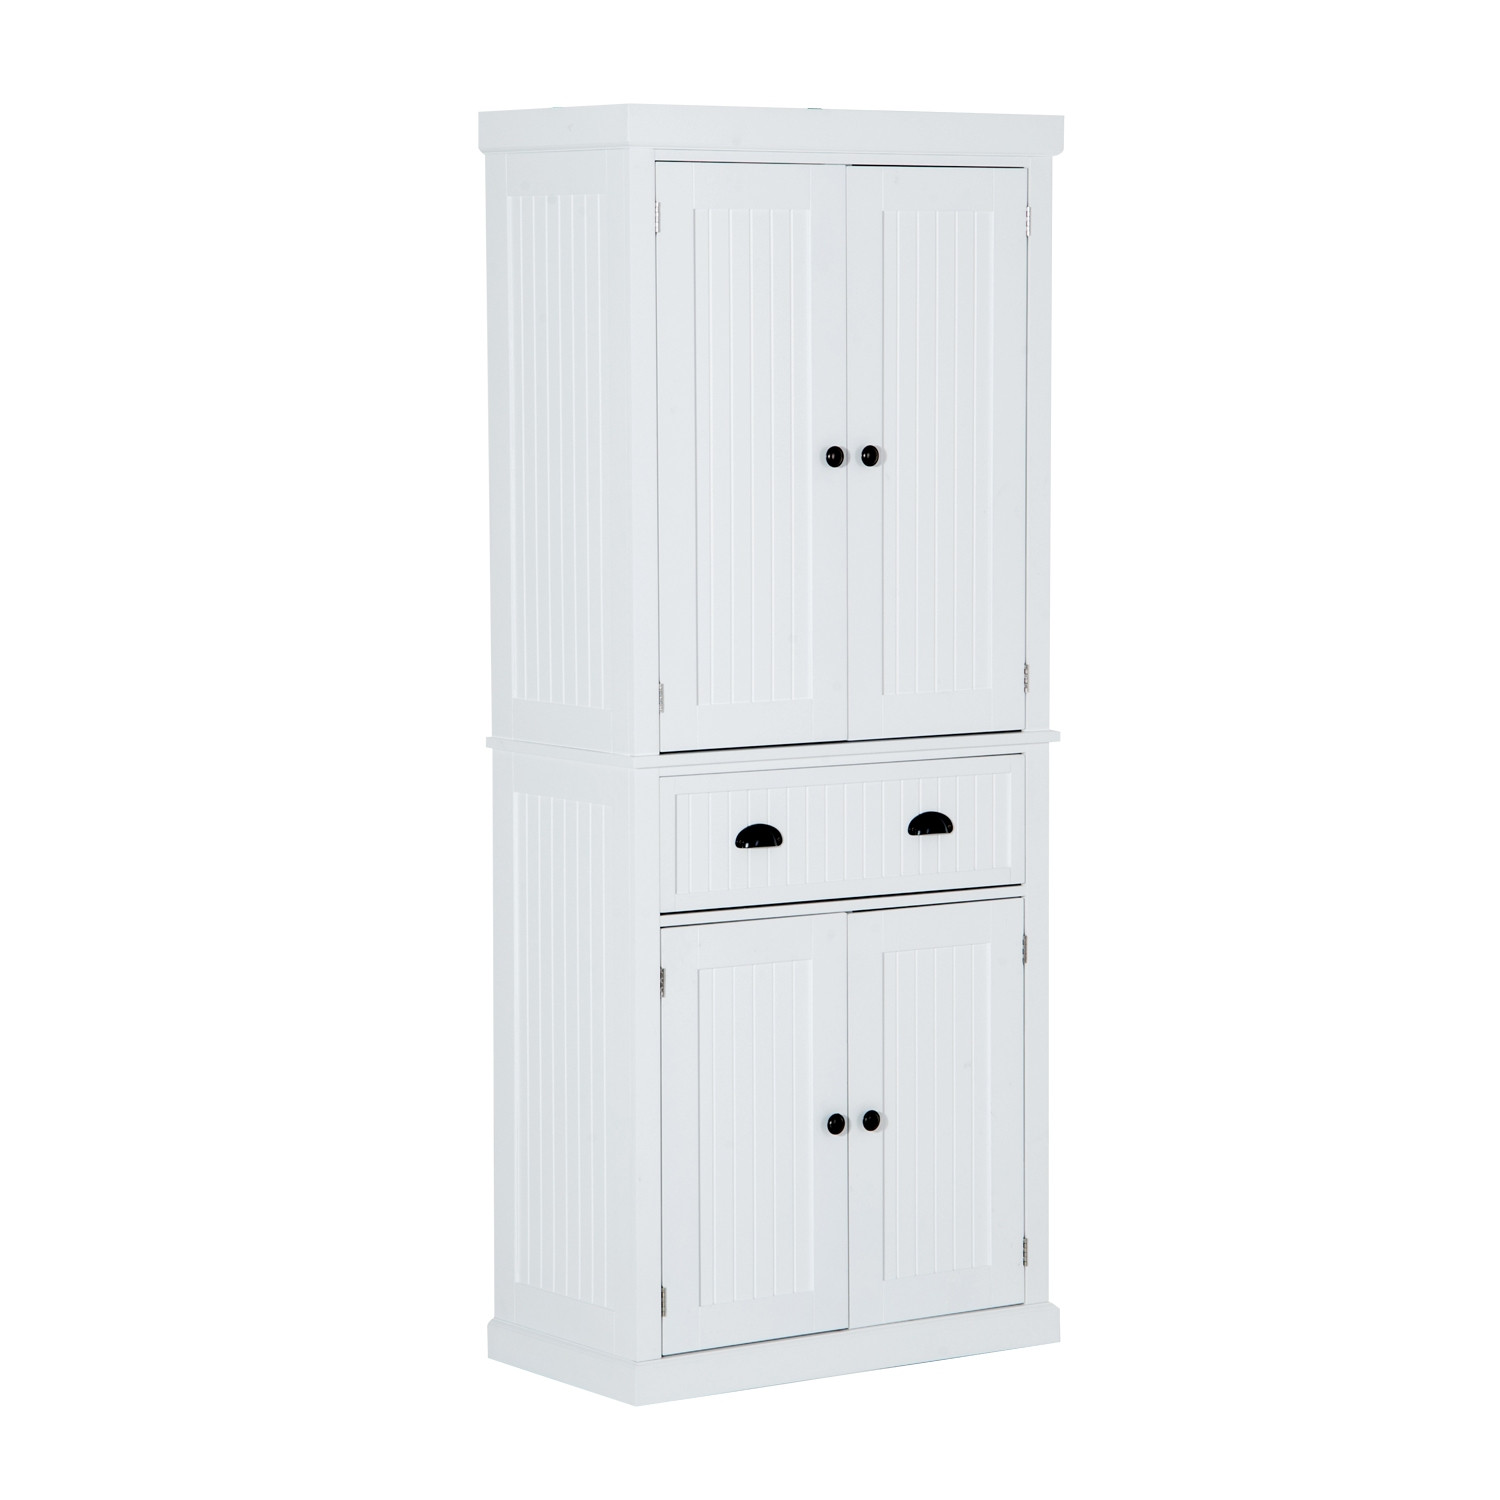 White Kitchen Pantry Free Standing
 Aosom Hom Free Standing Colonial Wood Storage